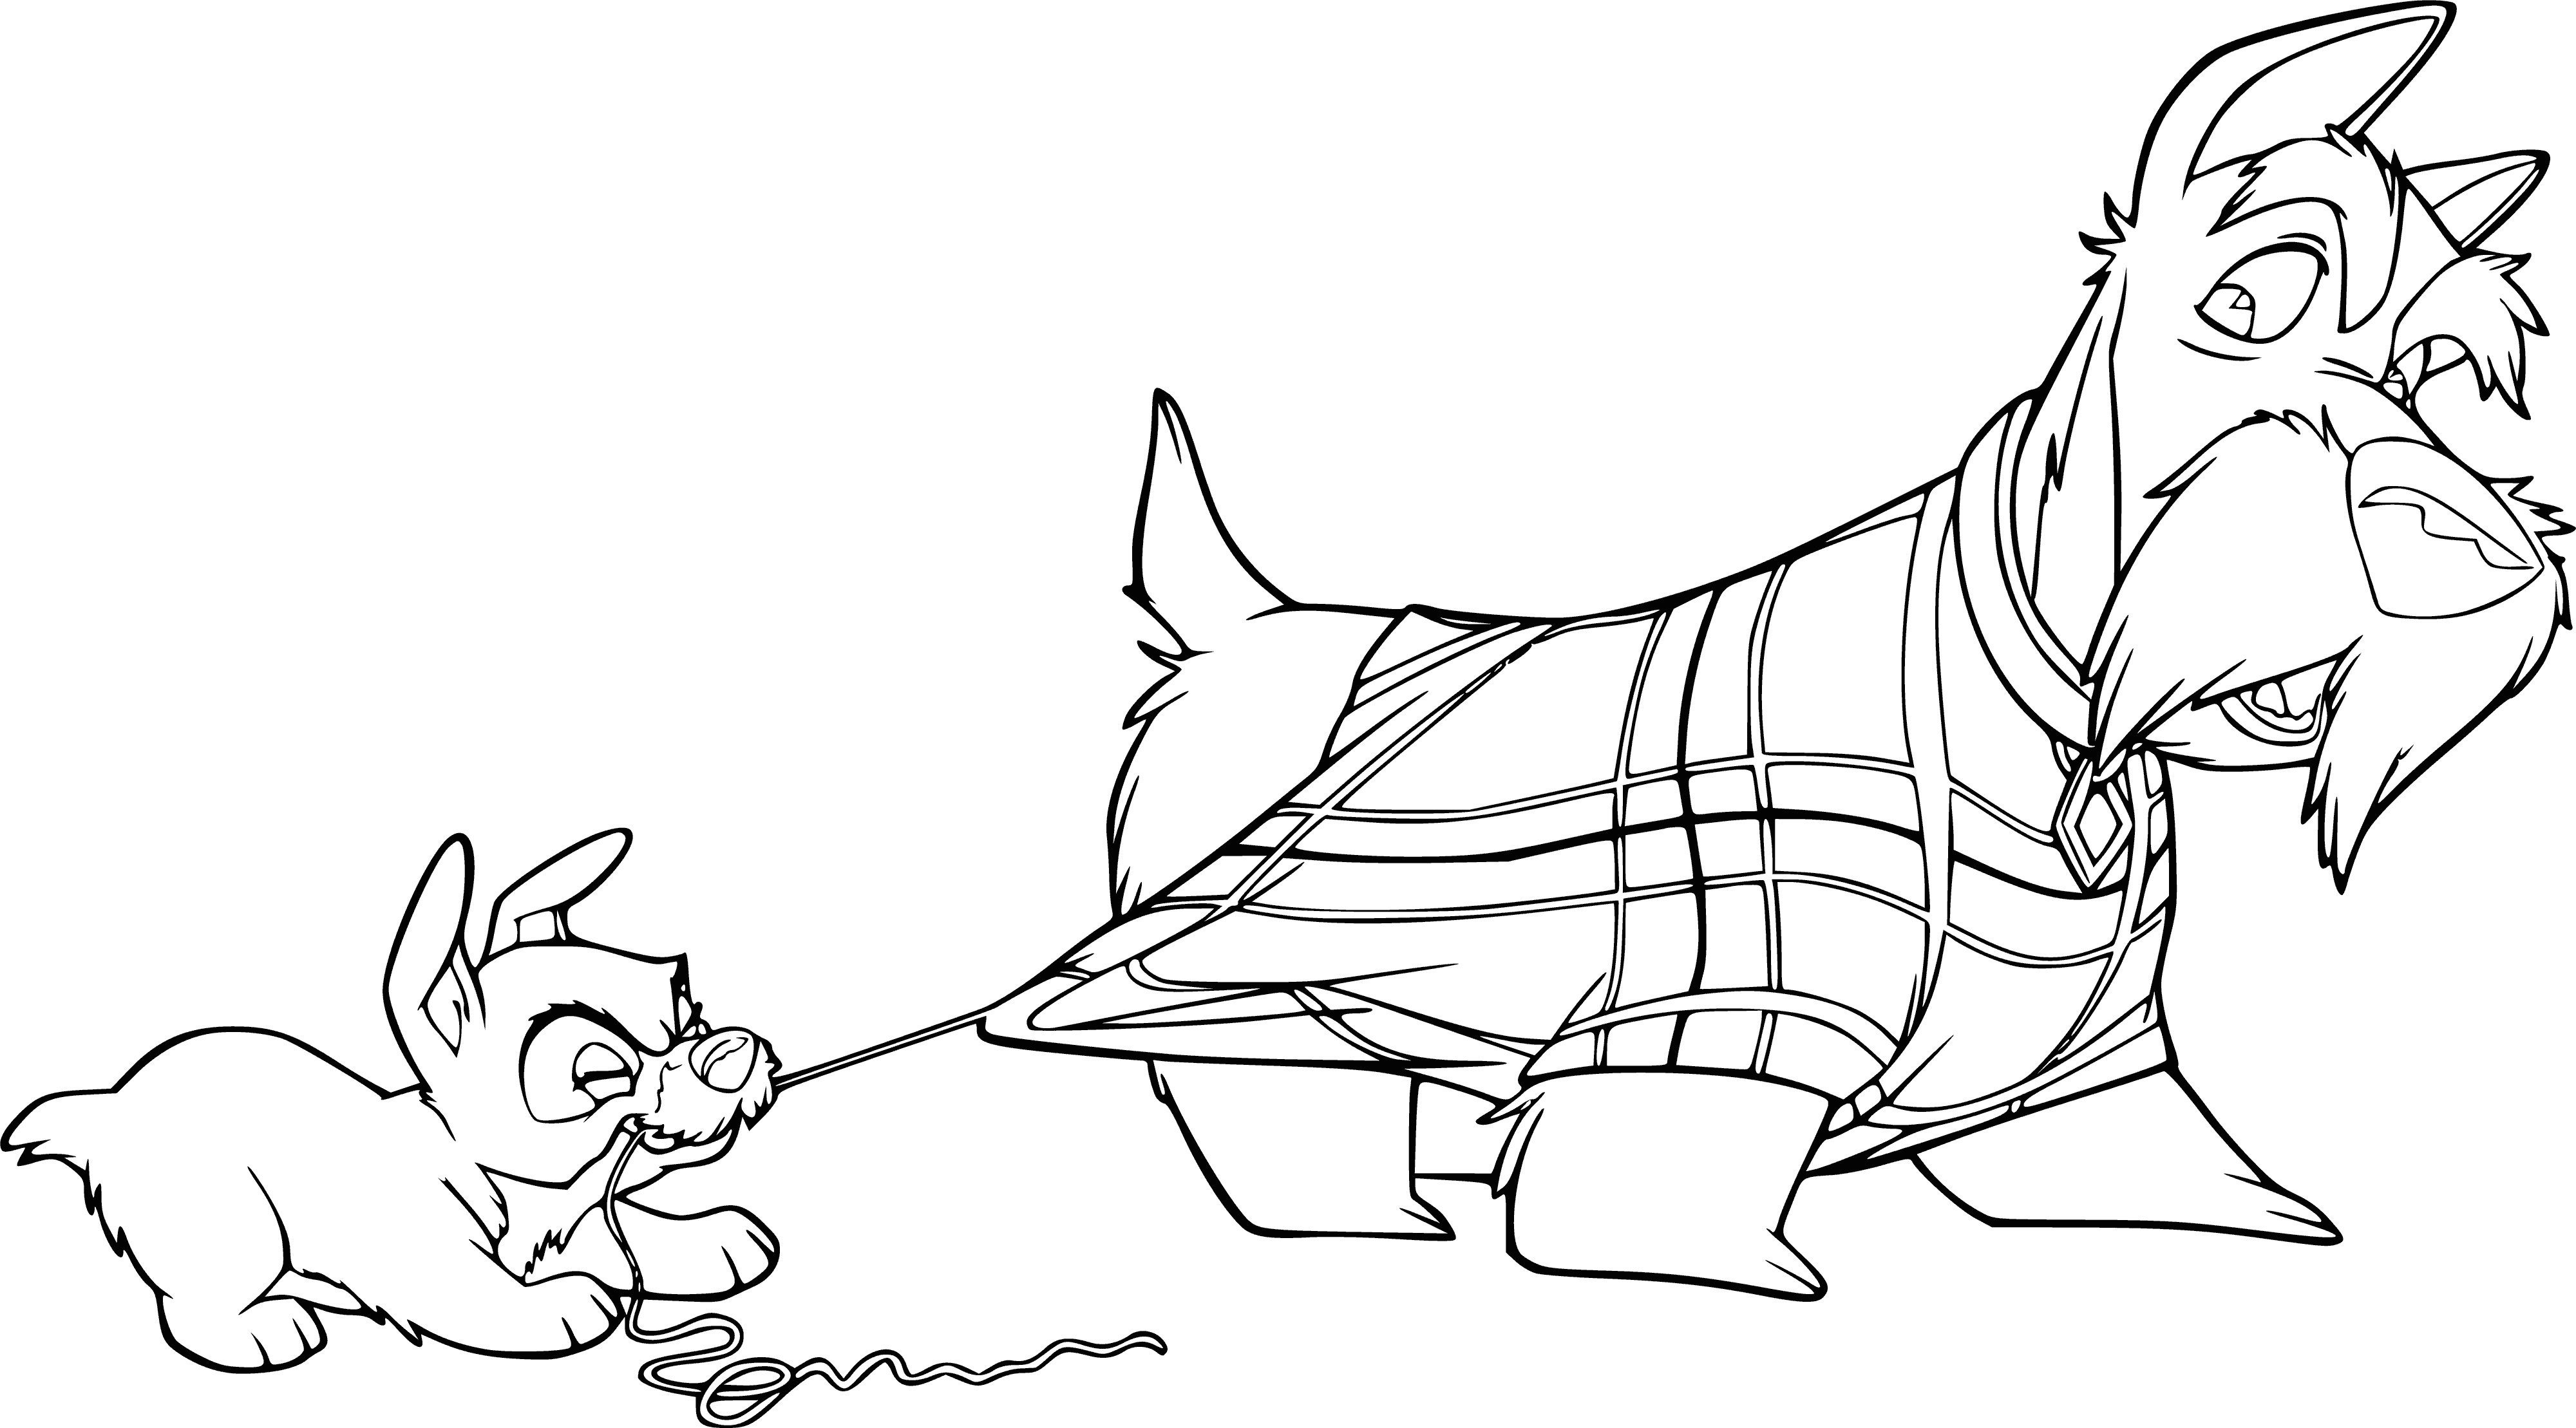 Puppy and dog coloring page